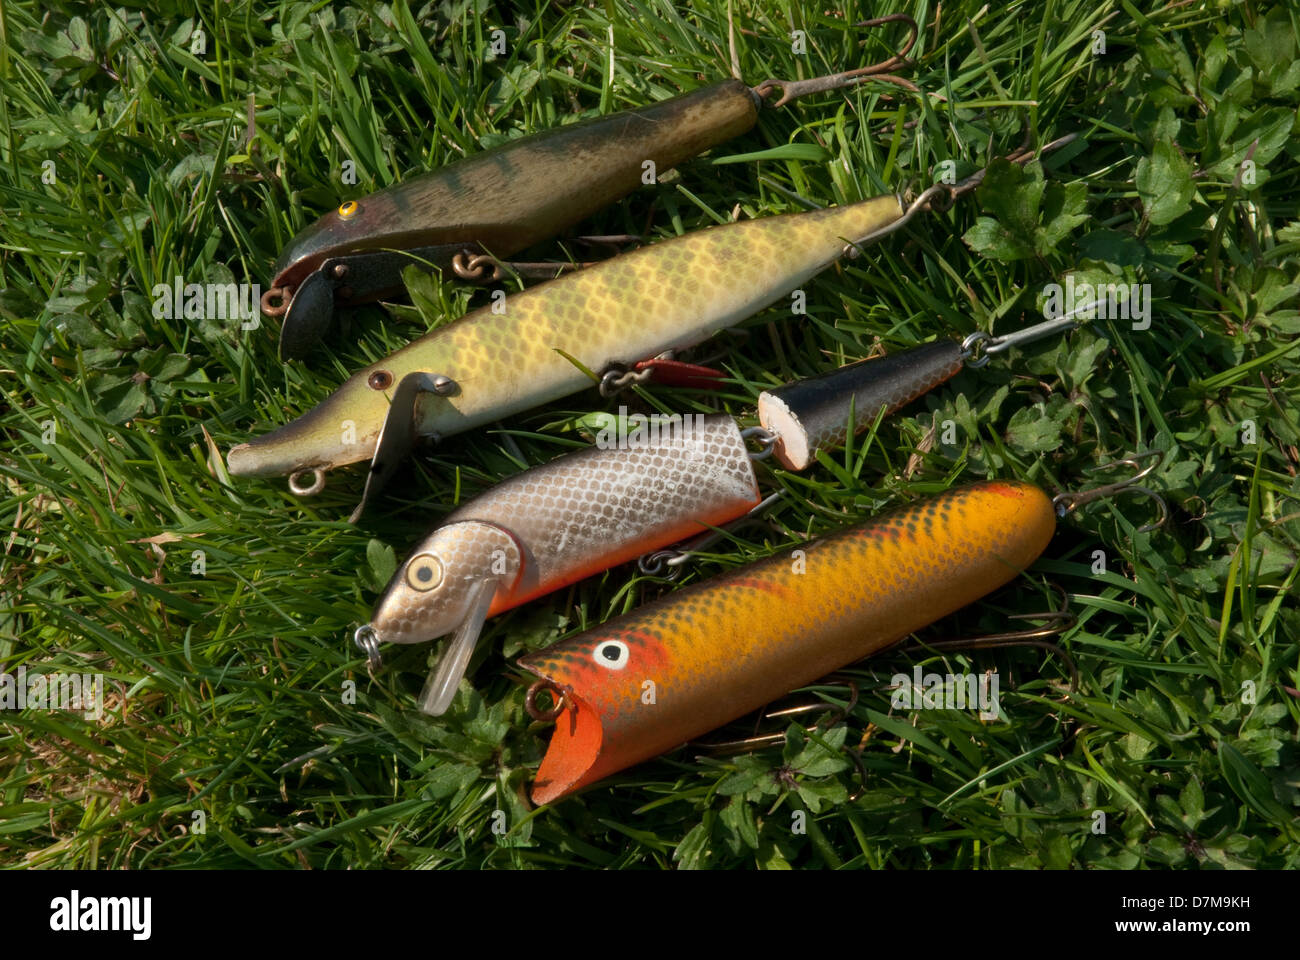 https://c8.alamy.com/comp/D7M9KH/a-selection-of-vintage-pike-freshwater-fishing-lures-D7M9KH.jpg